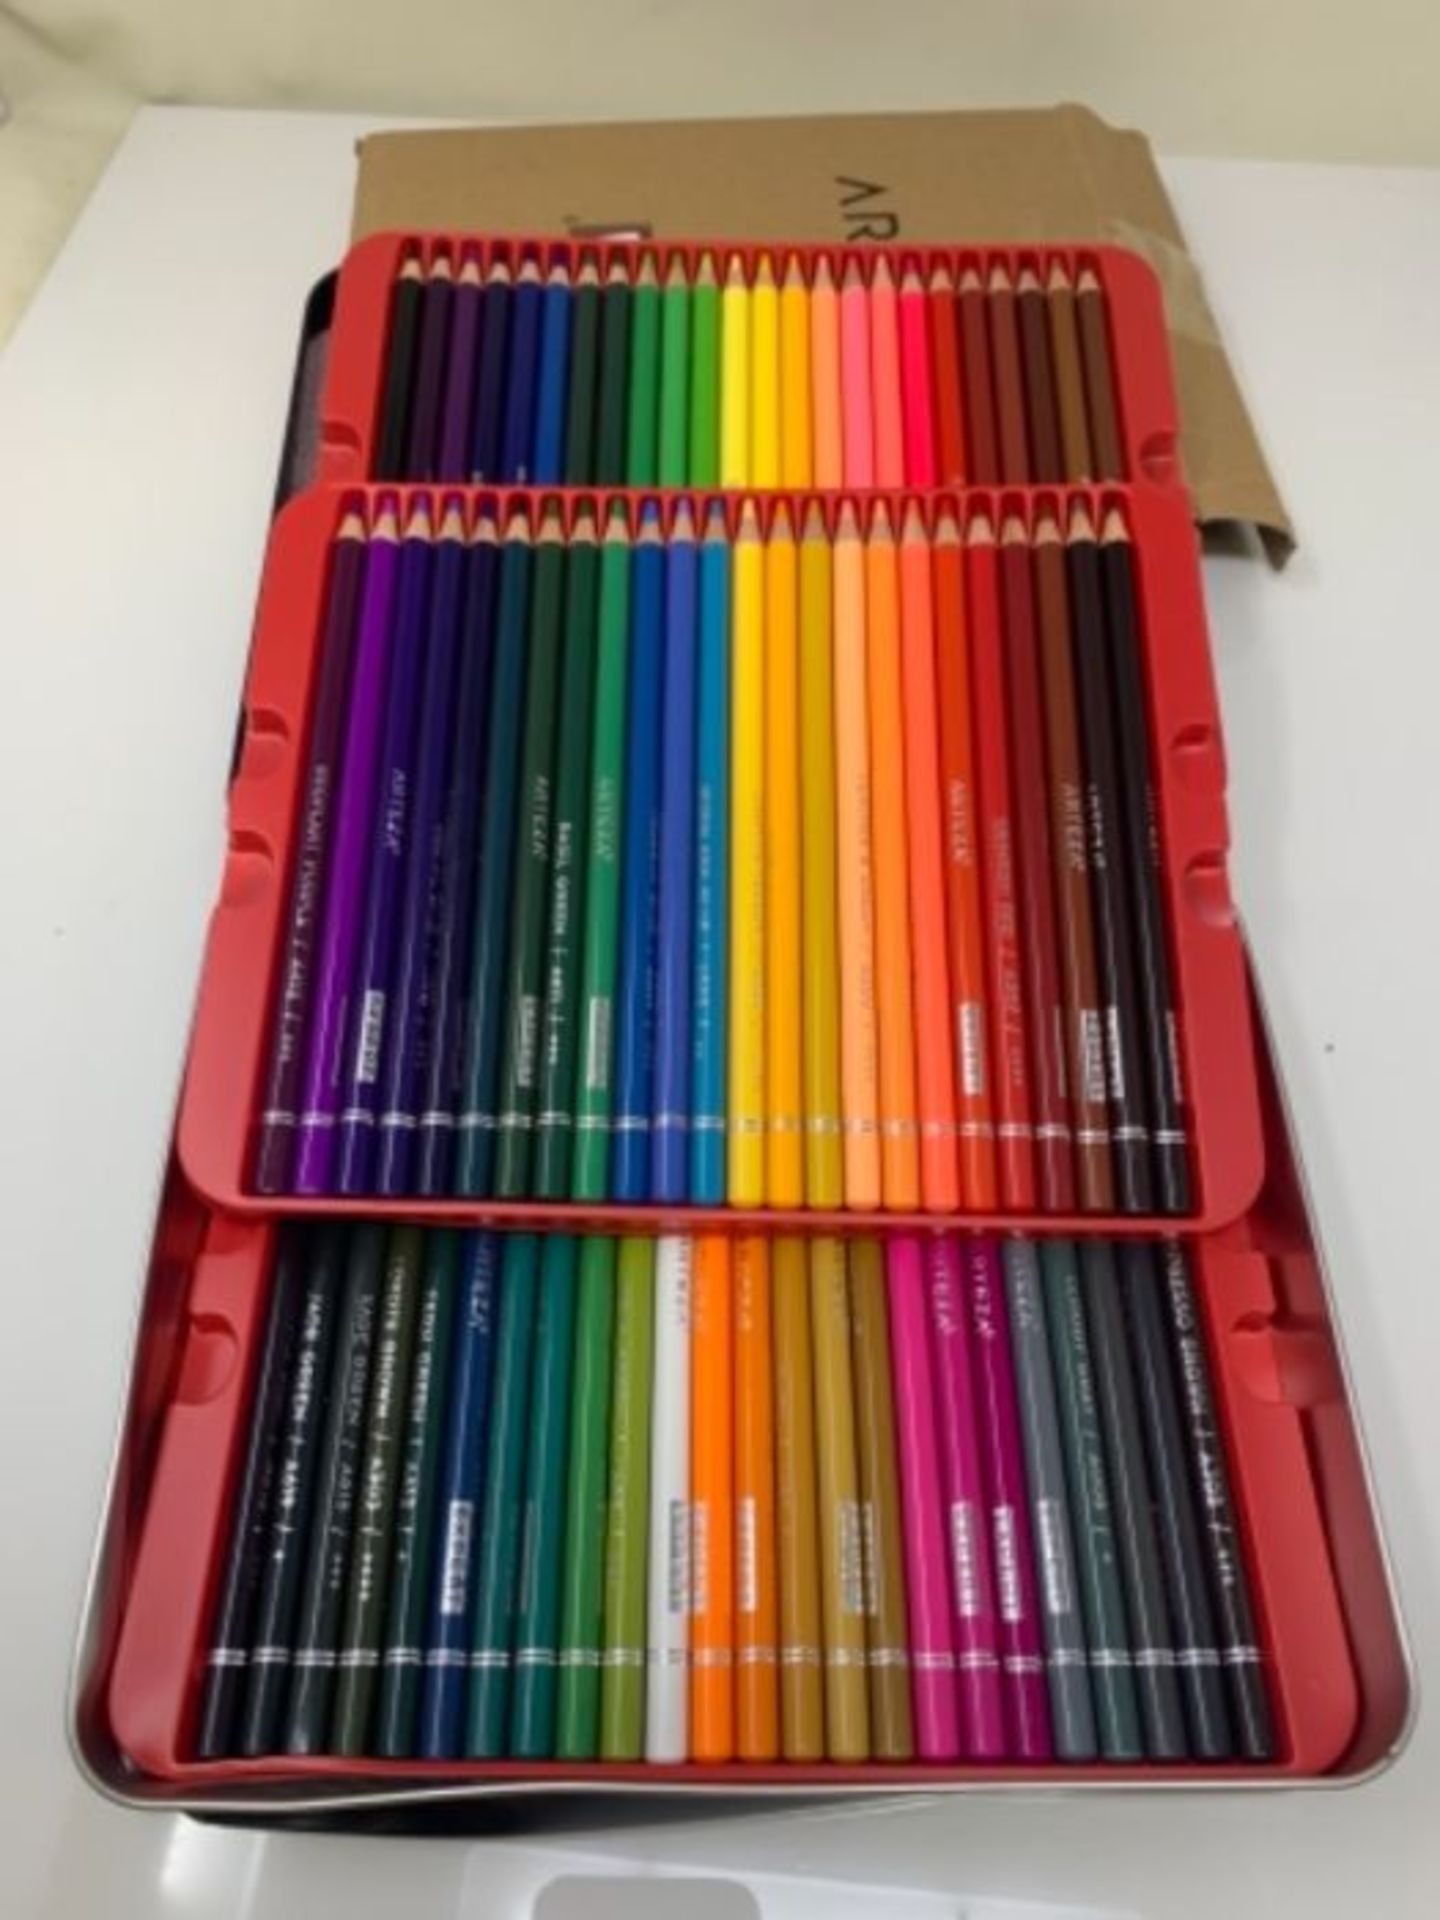 Arteza Colouring Pencils, Professional Set of 72 Colours in a Tin Box, Soft Wax-Based - Image 3 of 3